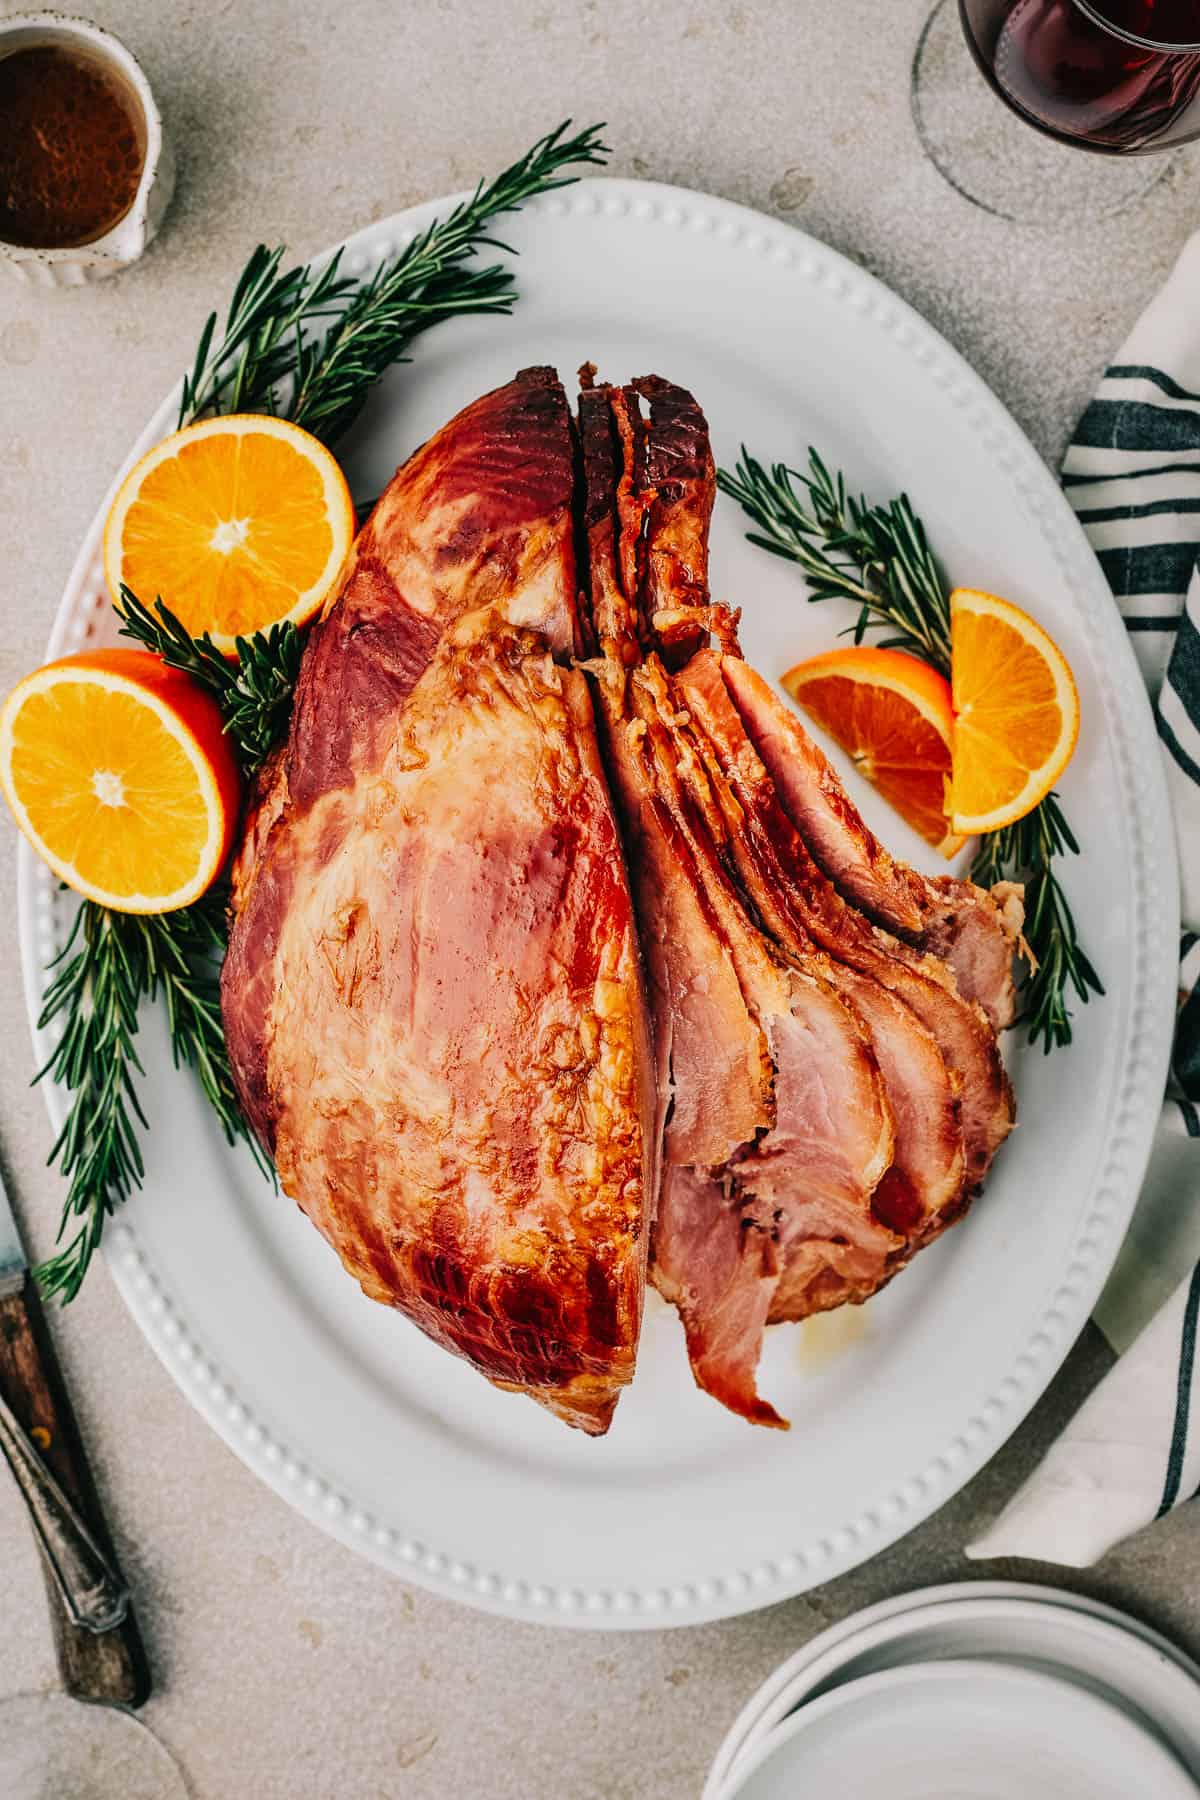 Overhead shot of a partially carved ham, with slices fanning out, on a serving platter garnished with orange slices and rosemary.